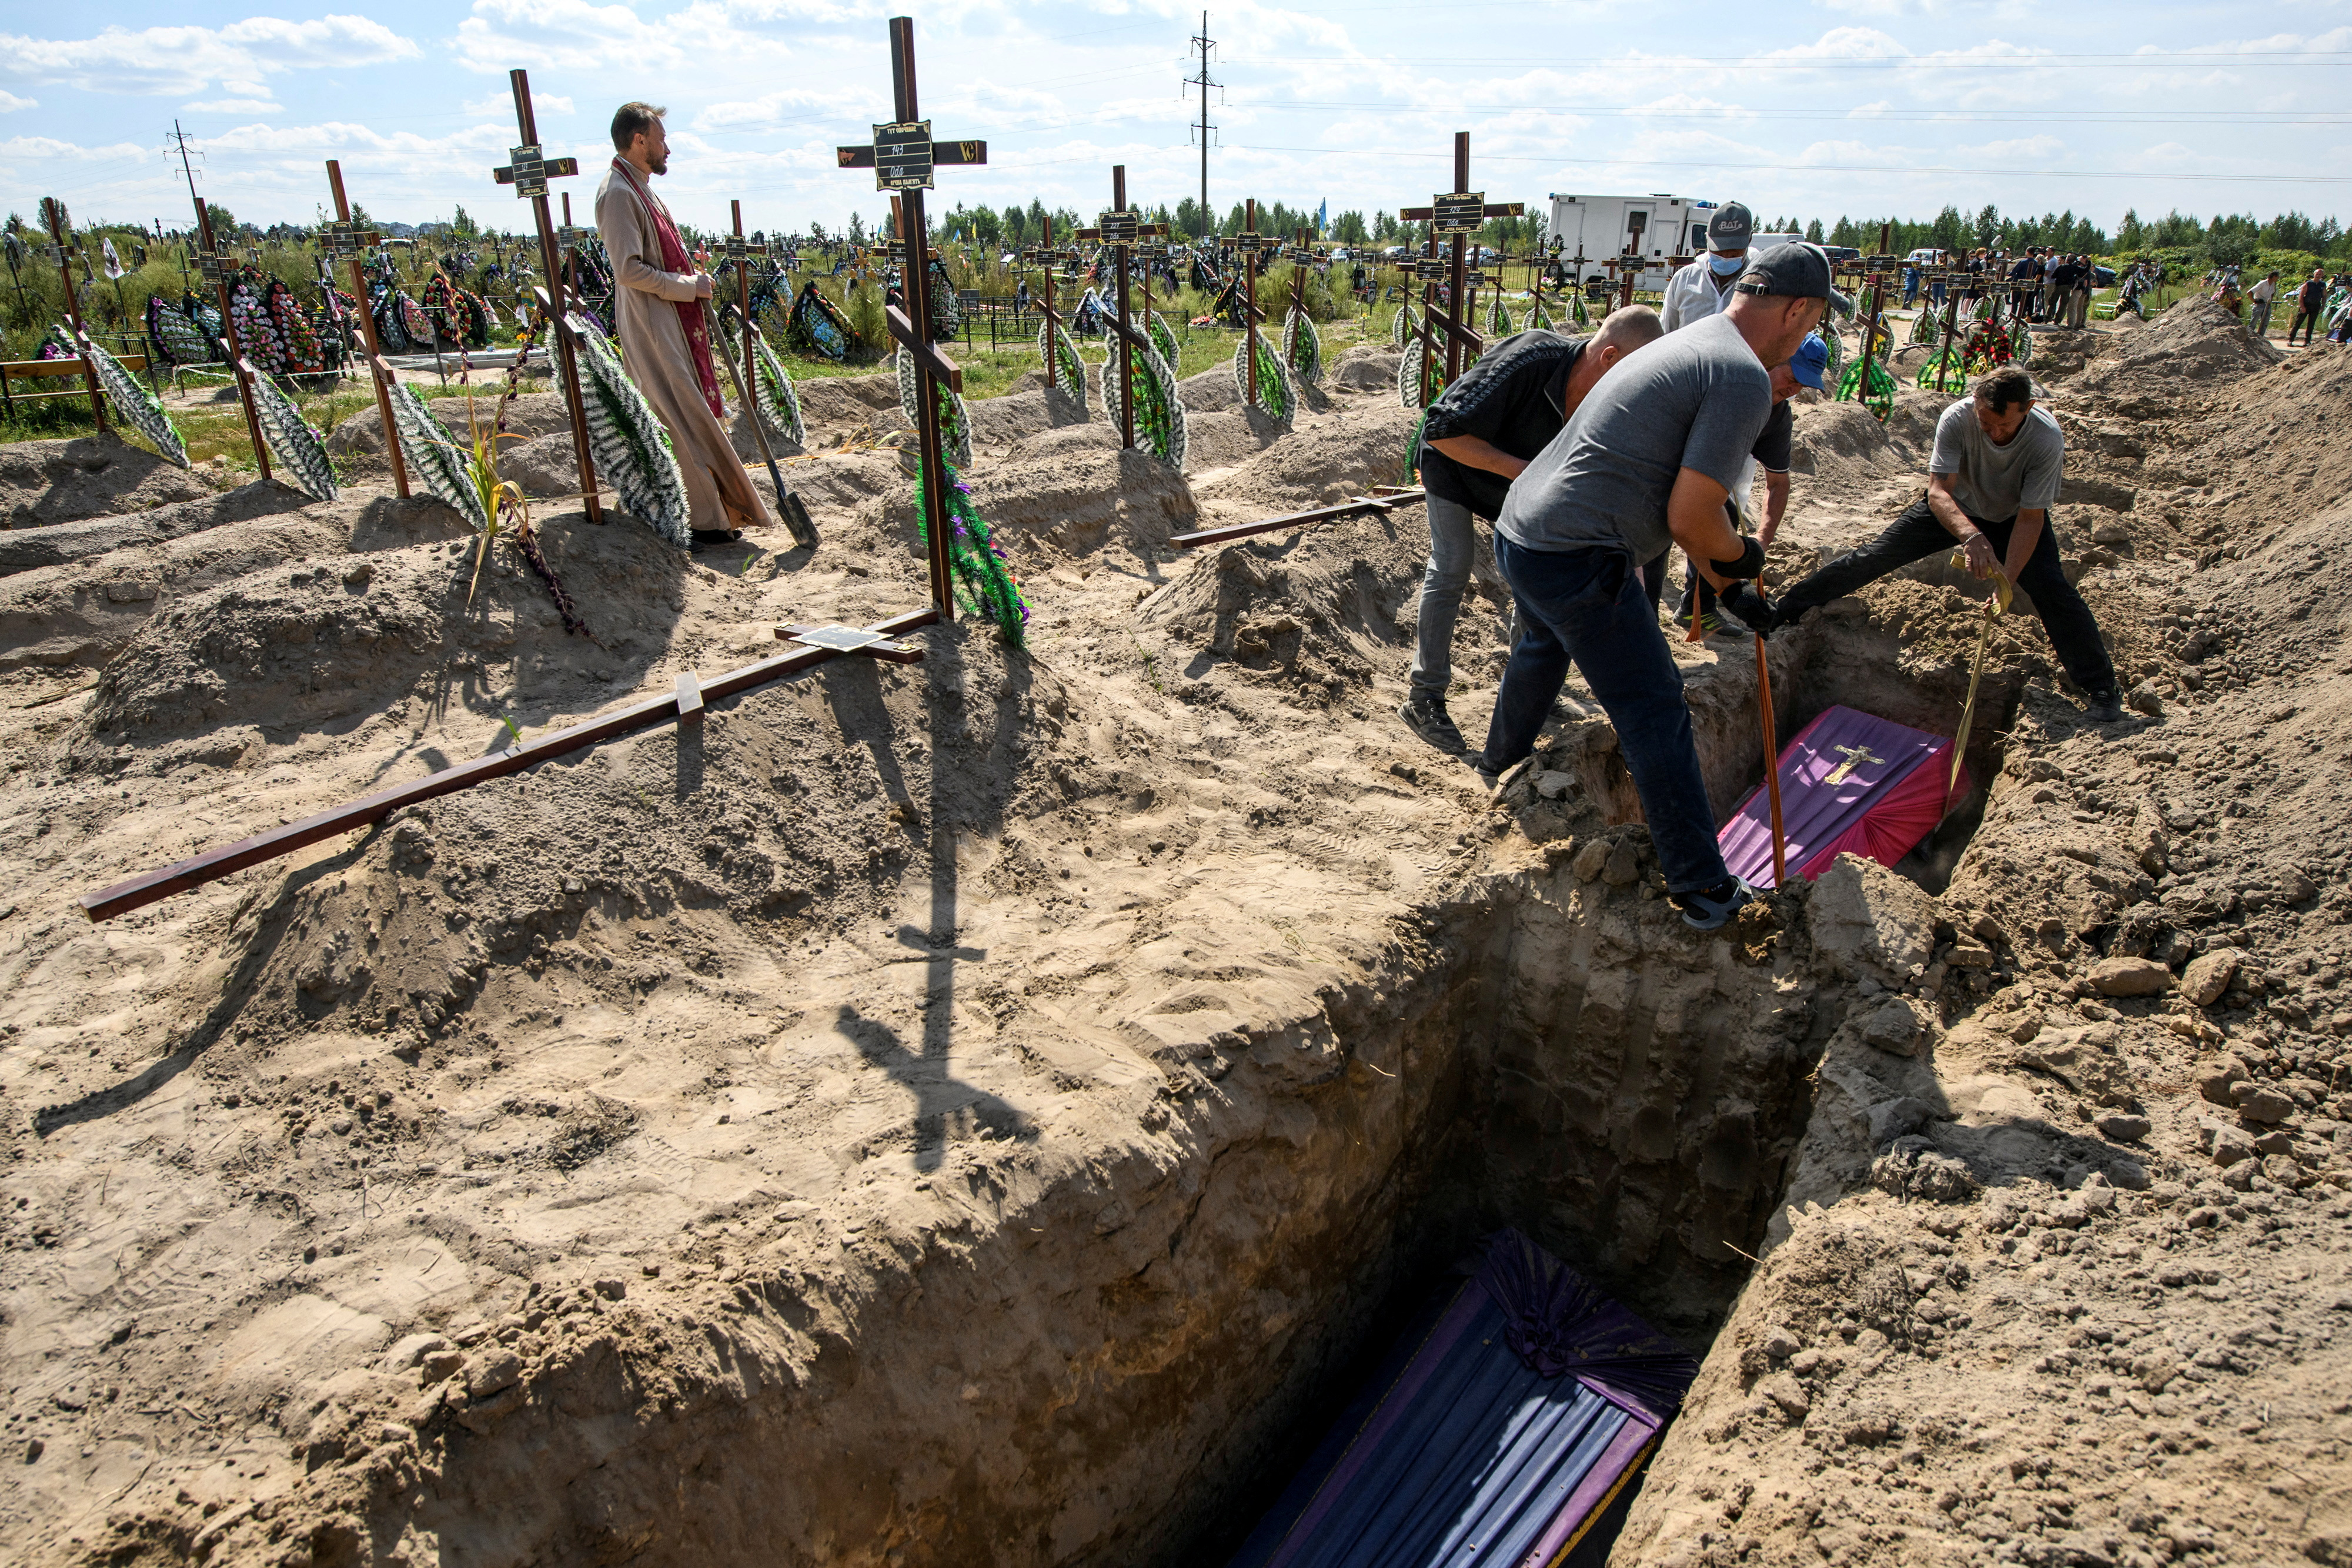 Mass burial of unidentified people killed during Russian invasion in Bucha